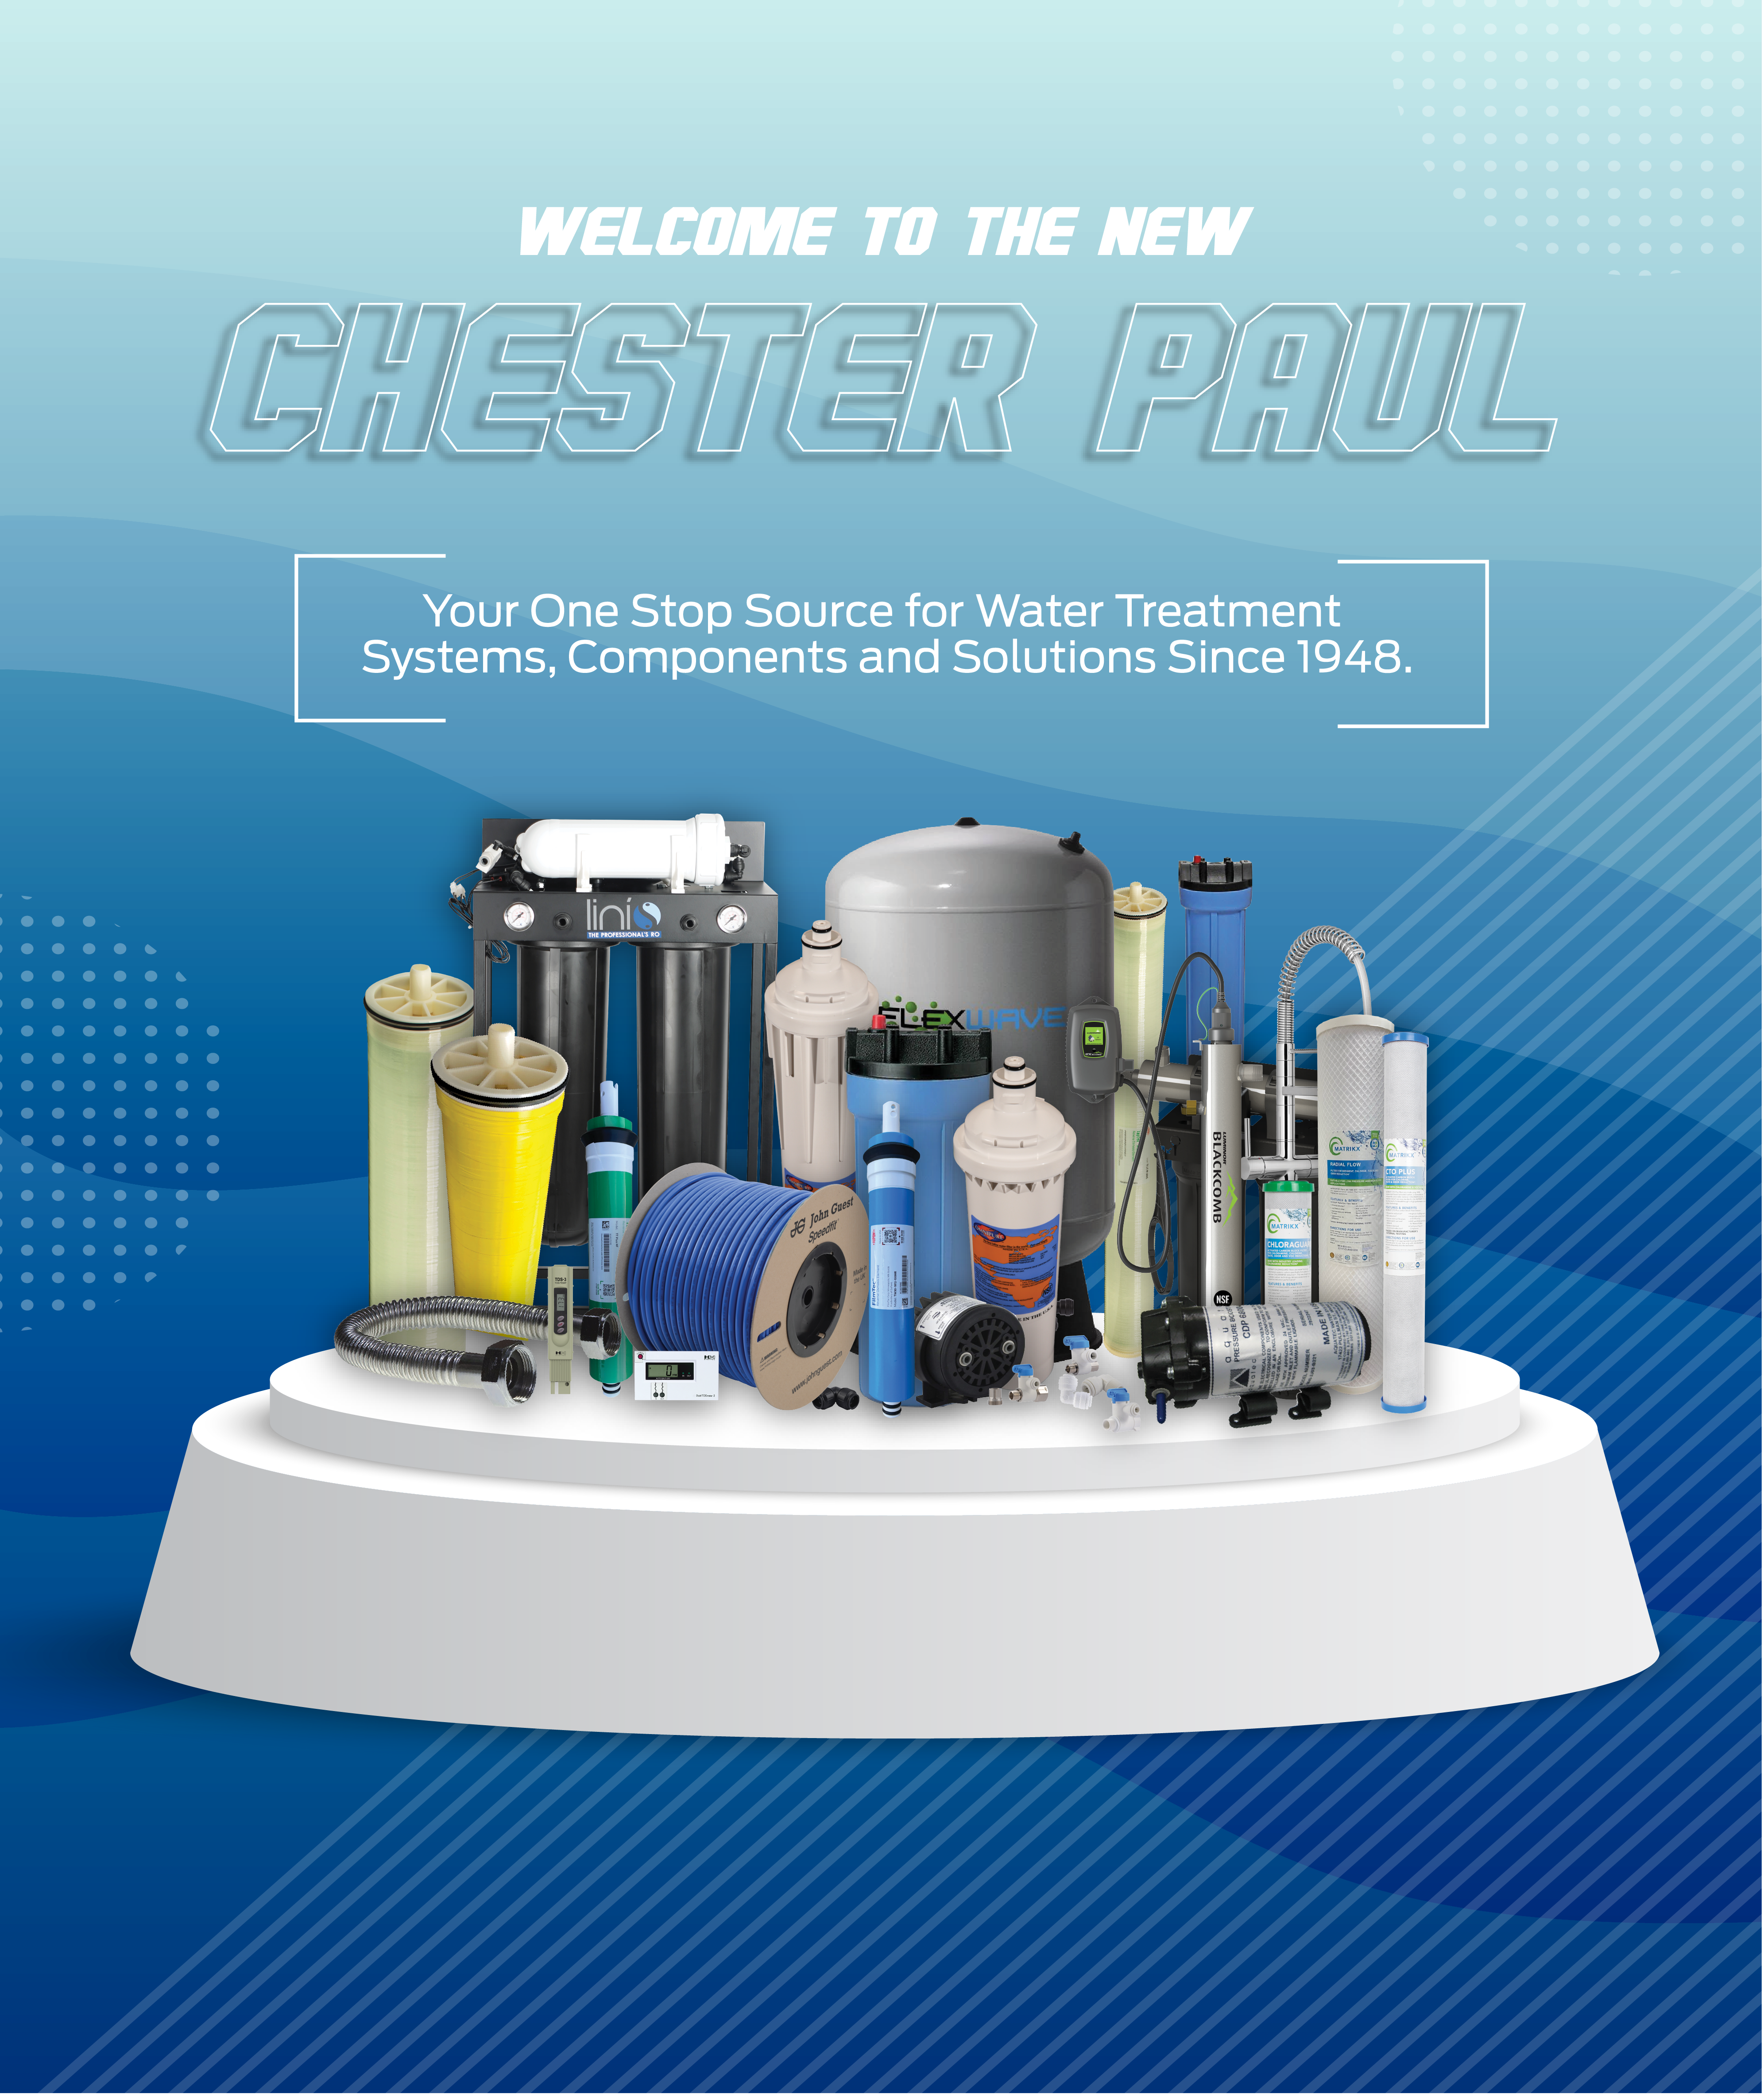 Welcome to the new Chester Paul. Your One Stop Source for water treatment systems, components, and solutions since 1945.